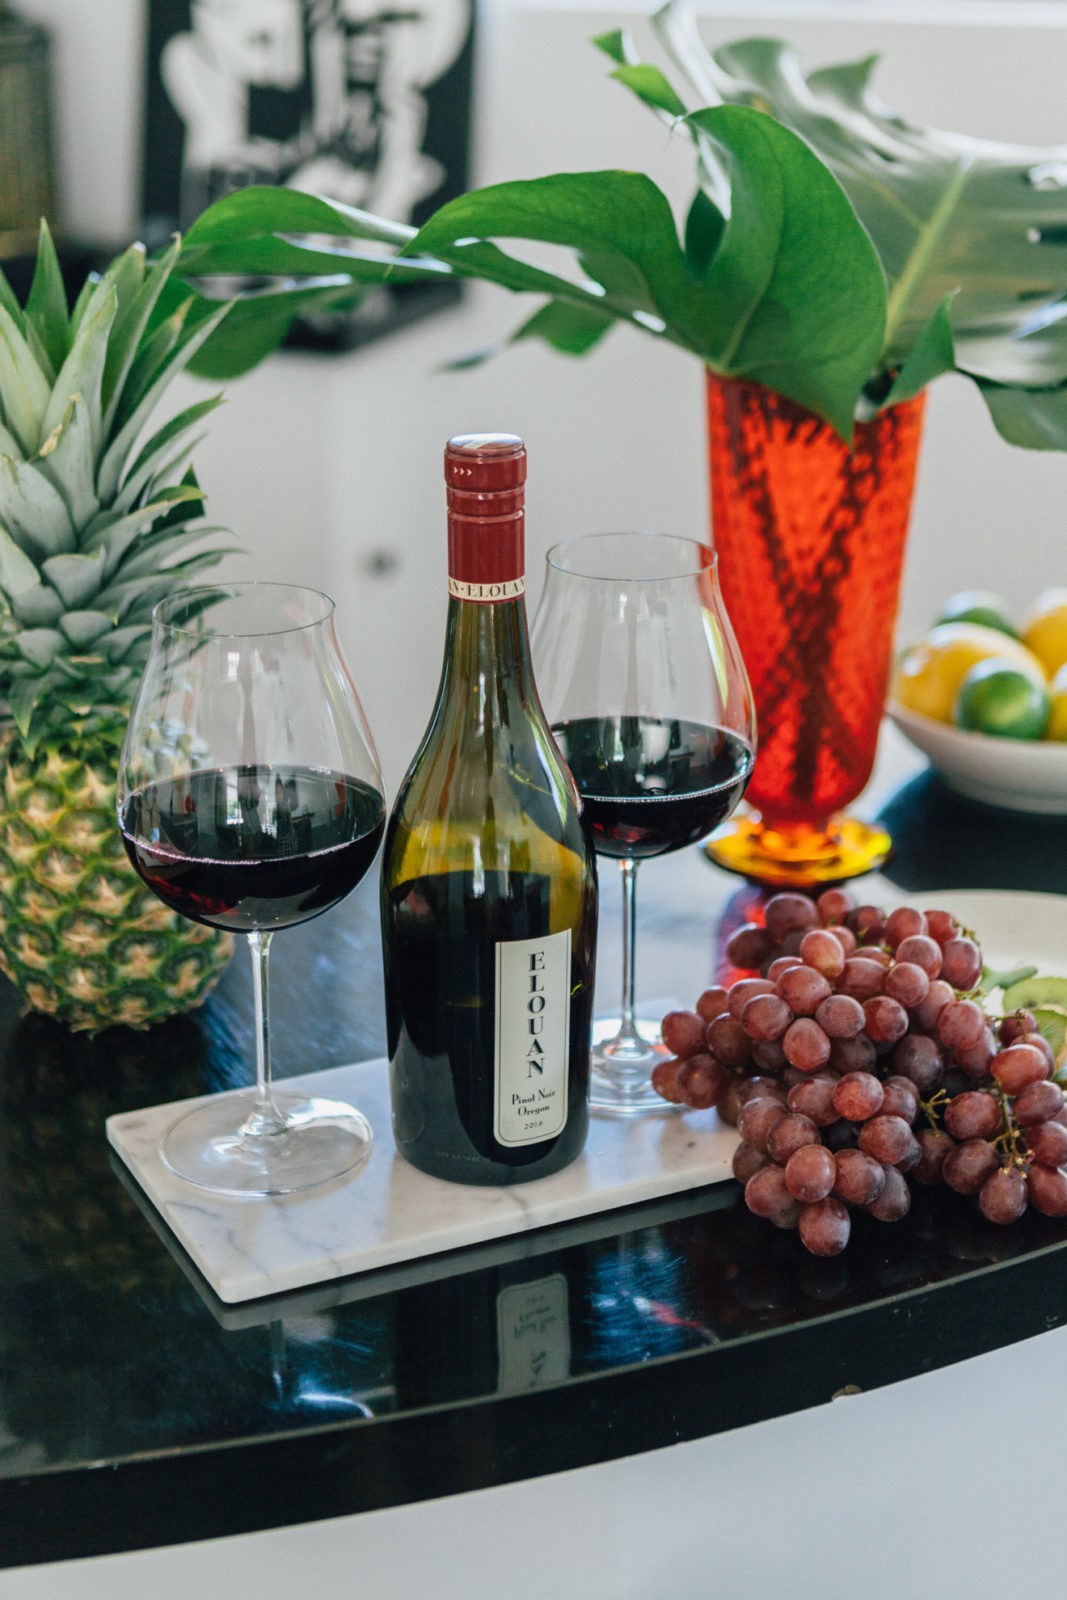 10 Tips For Hosting A Dinner Party Every Hostess Should Know featured by popular Los Angeles life and style blogger Laura Lily